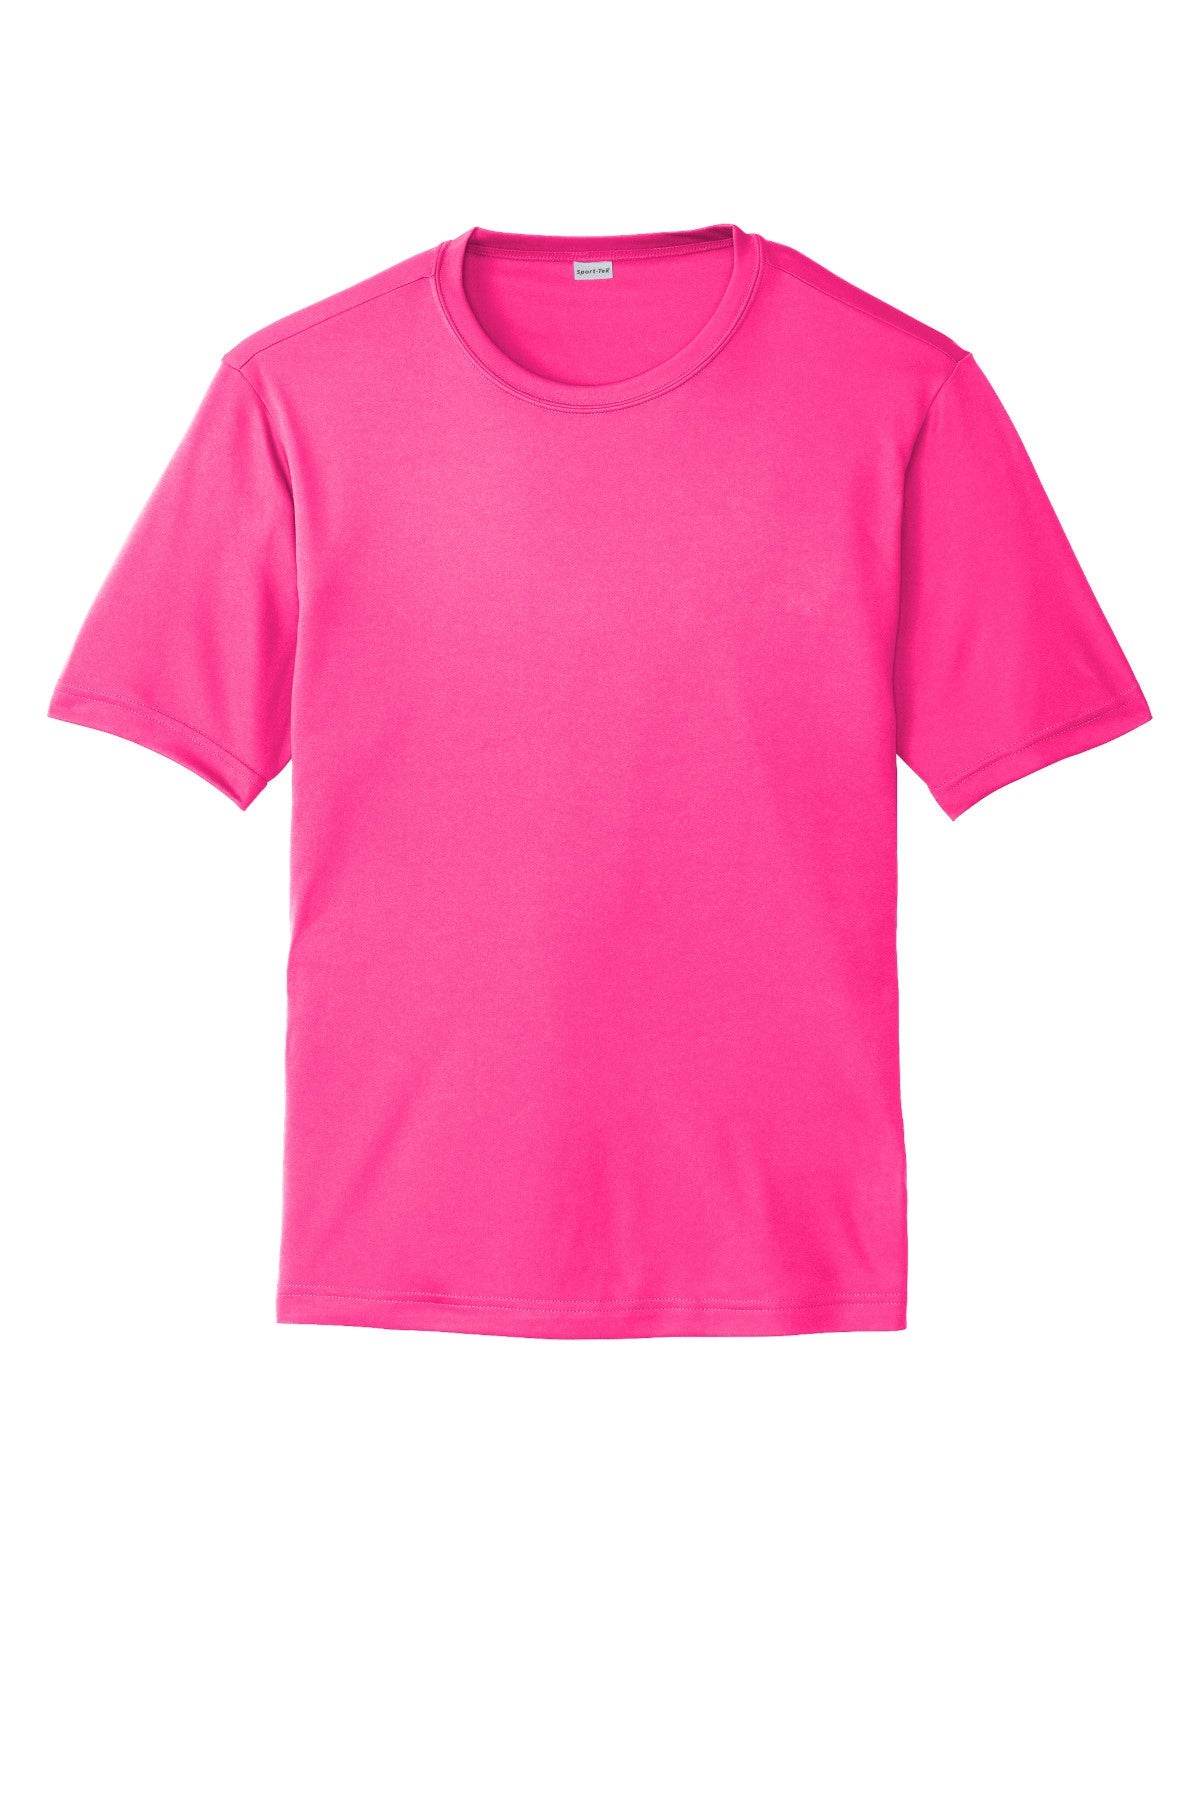 Sport-Tek St350 Polyester Adult T-Shirt Ad Small / Neon Pink